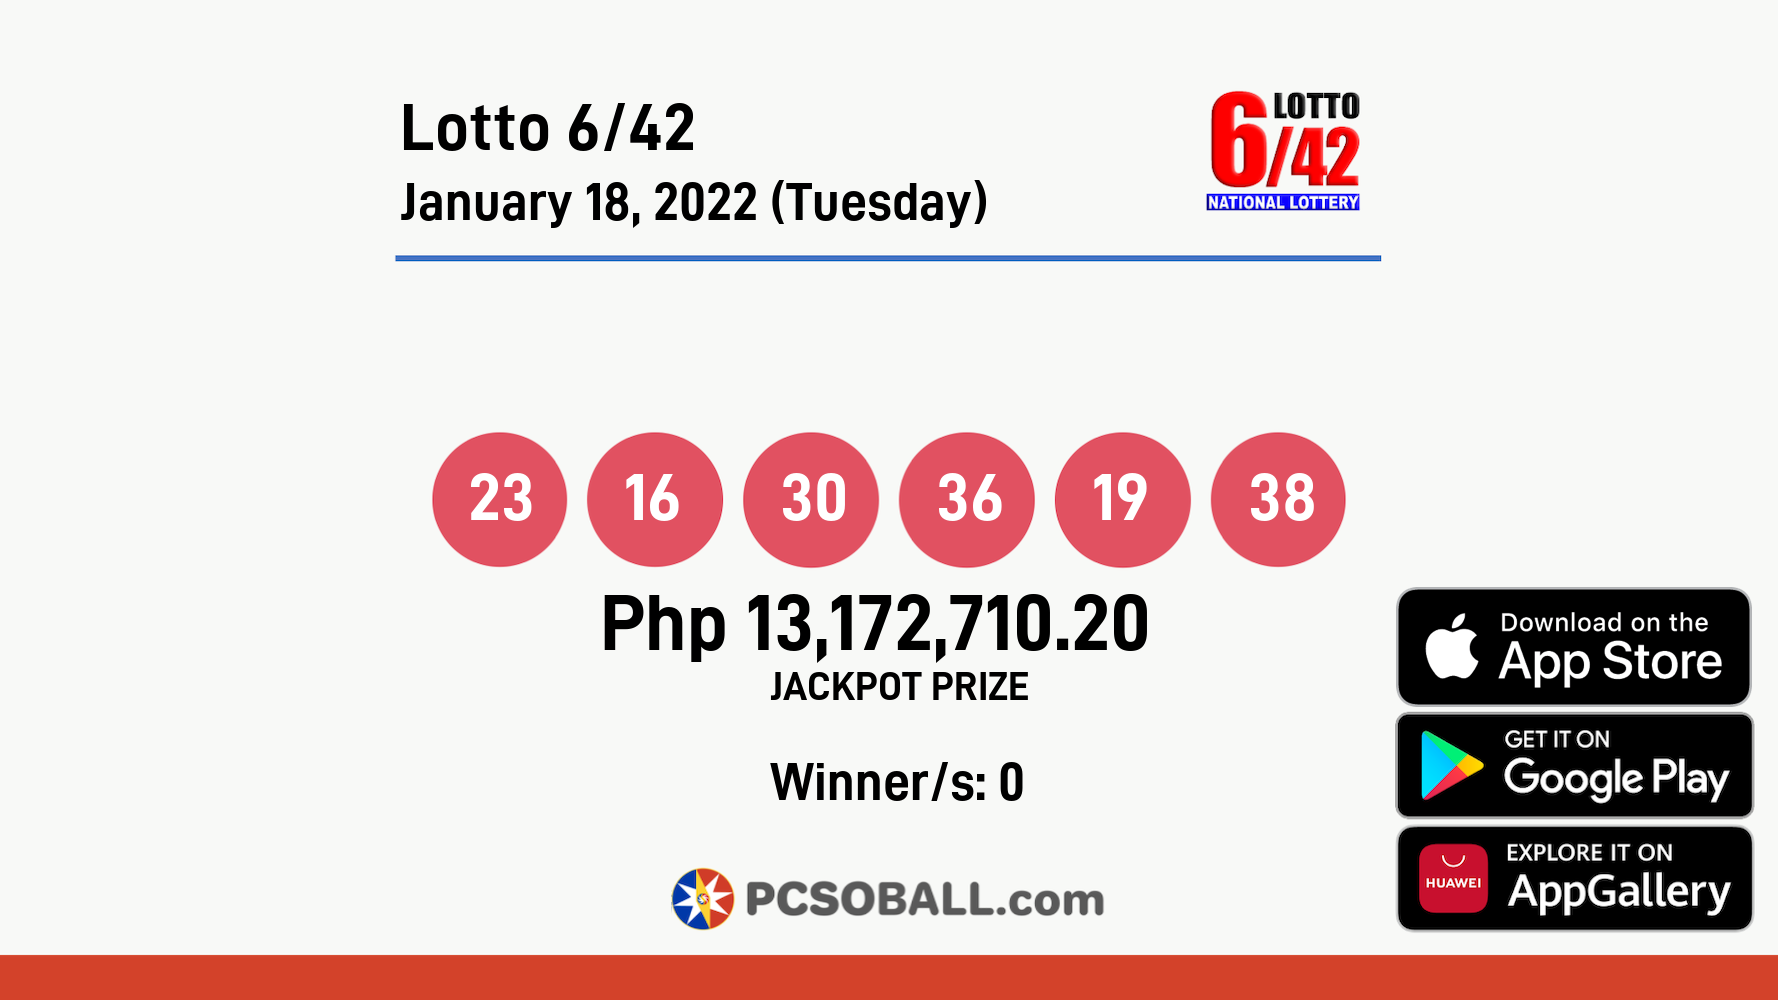 Lotto 6/42 January 18, 2022 (Tuesday) Result